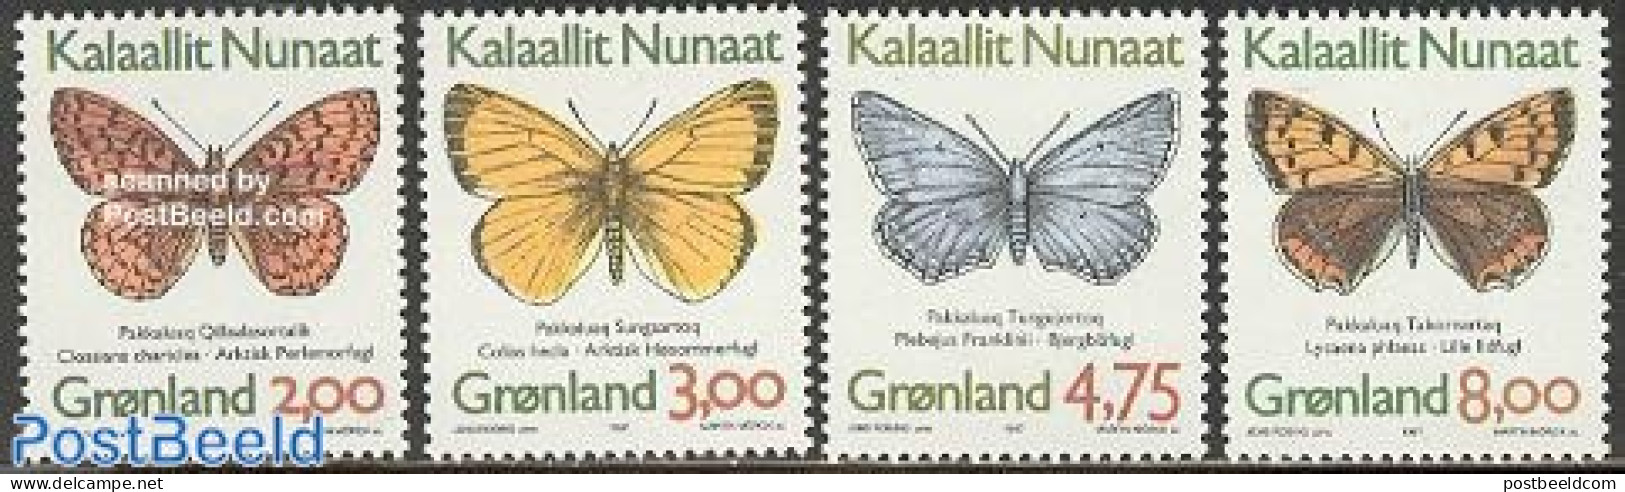 Greenland 1997 Butterflies 4v, Normal Paper (from Booklet), Mint NH, Nature - Butterflies - Unused Stamps